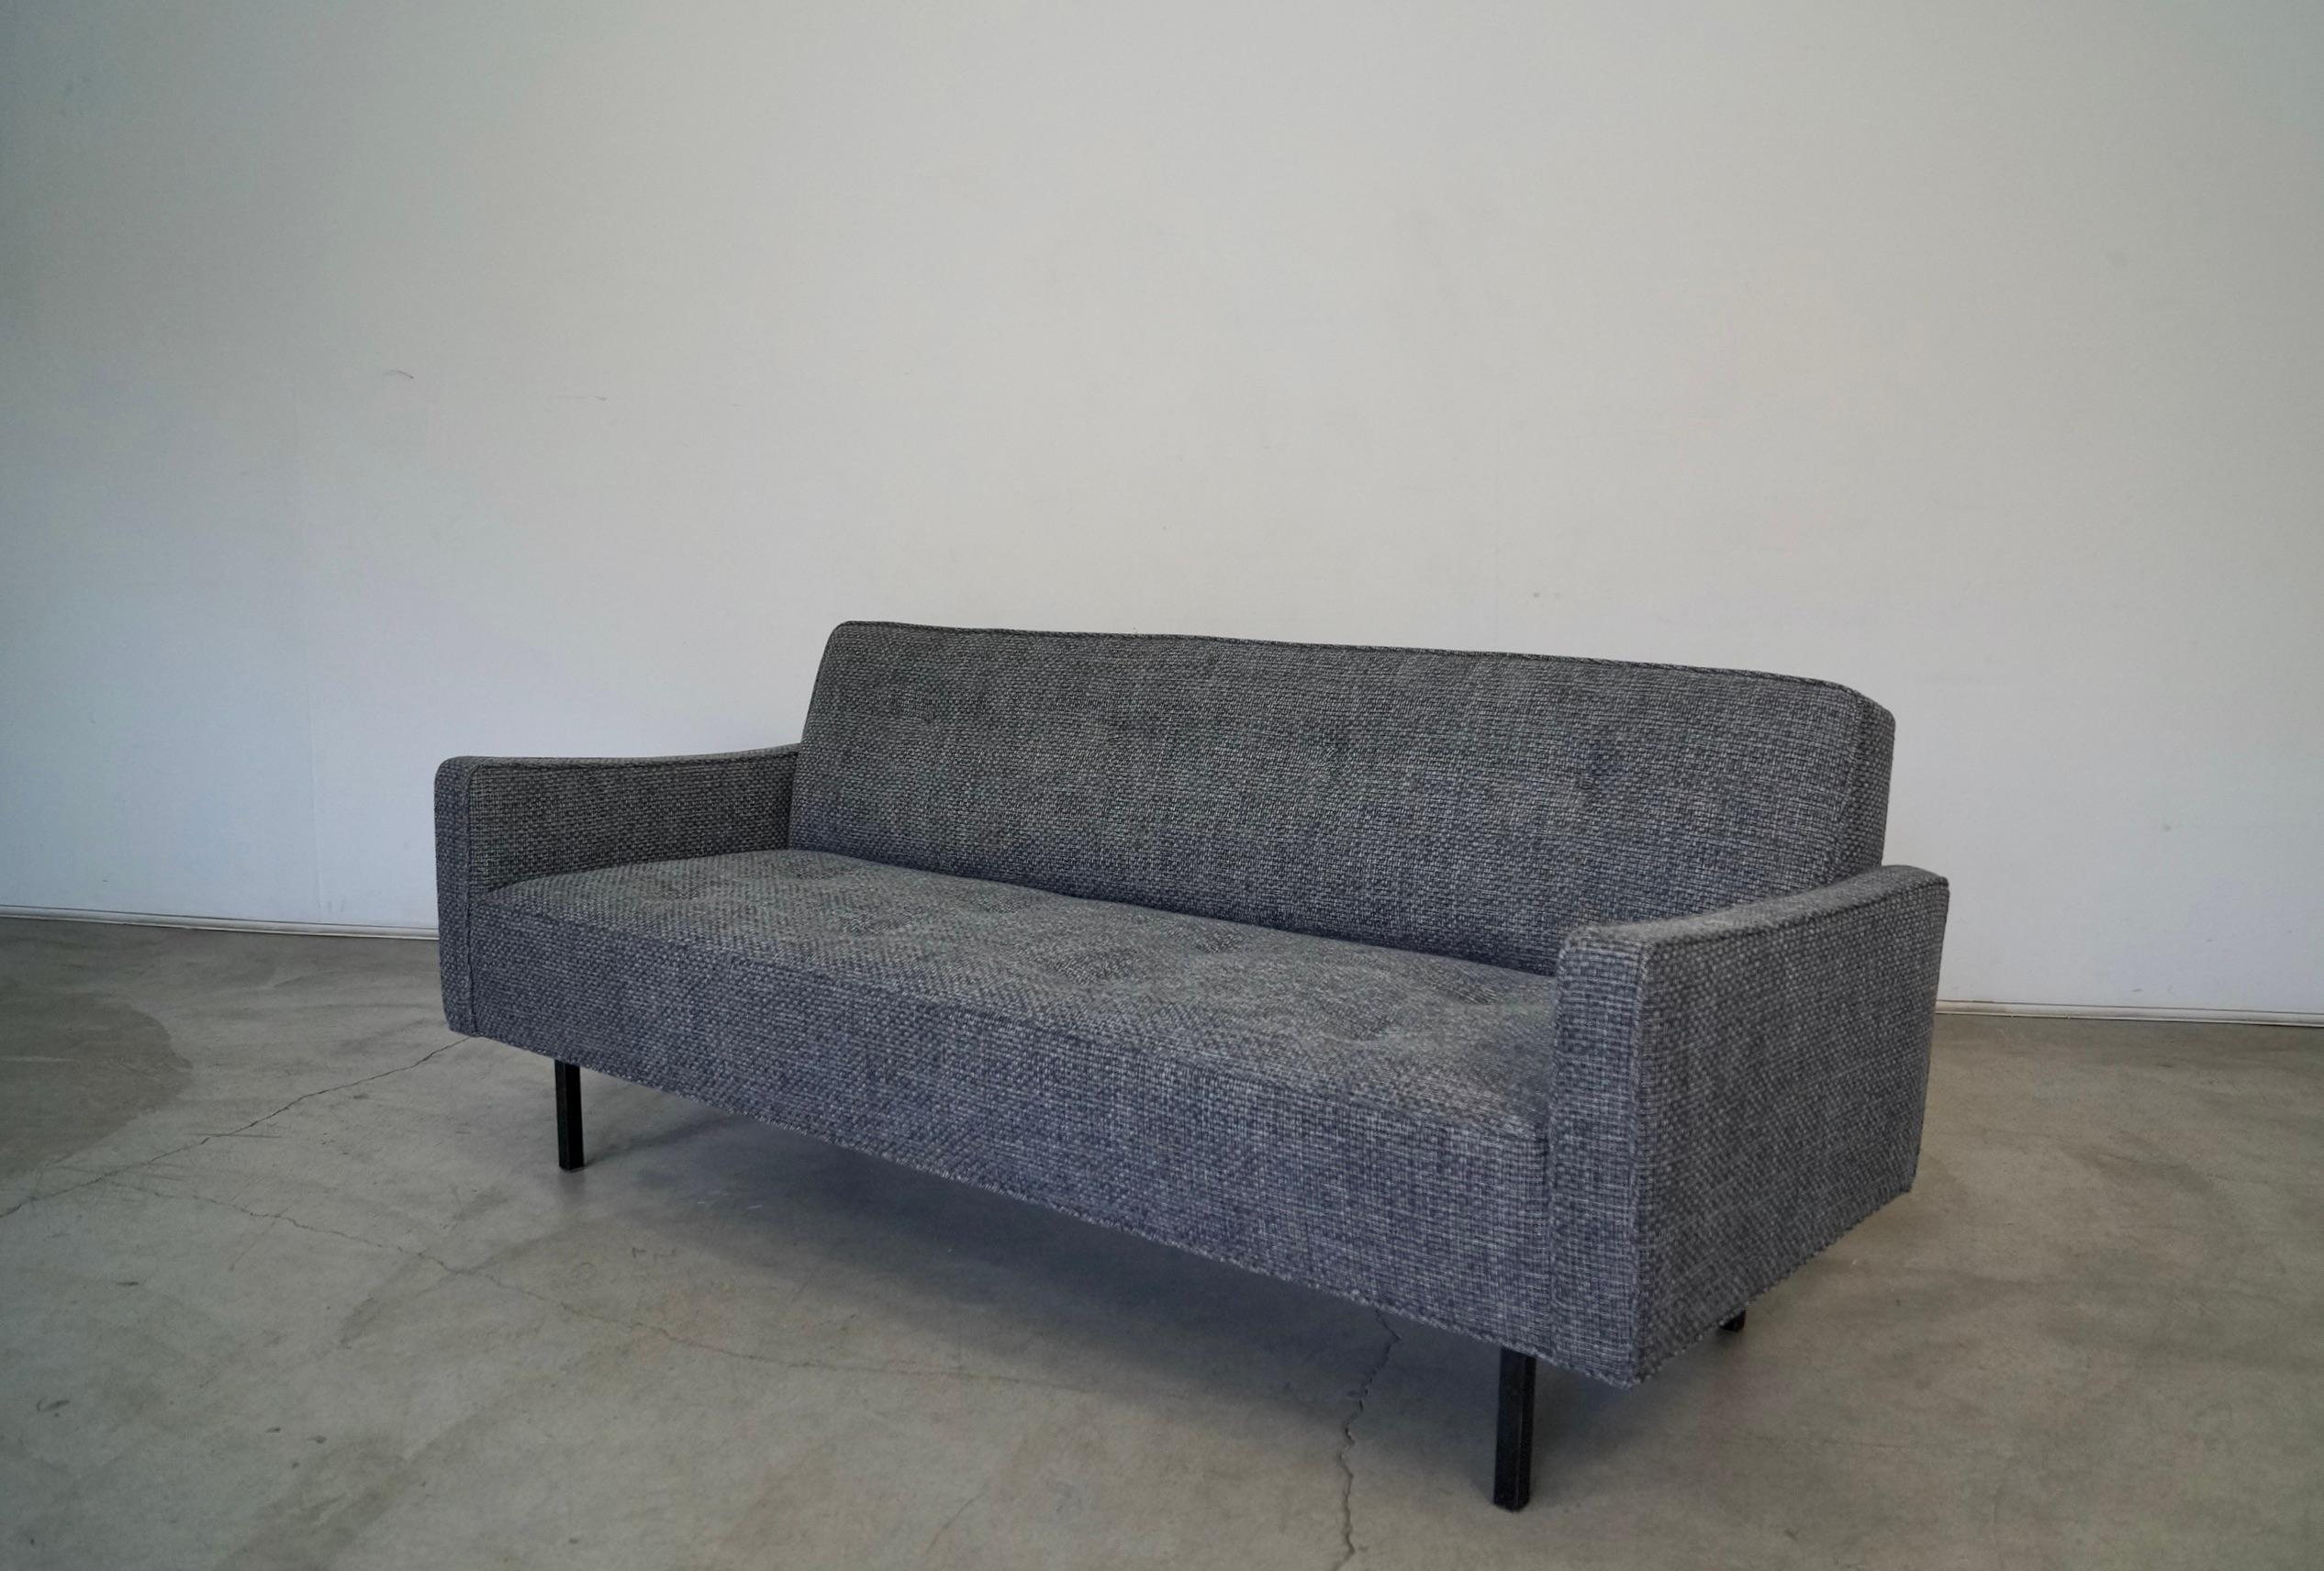 1960's Mid-Century Modern George Nelson Style Sofa In Excellent Condition For Sale In Burbank, CA